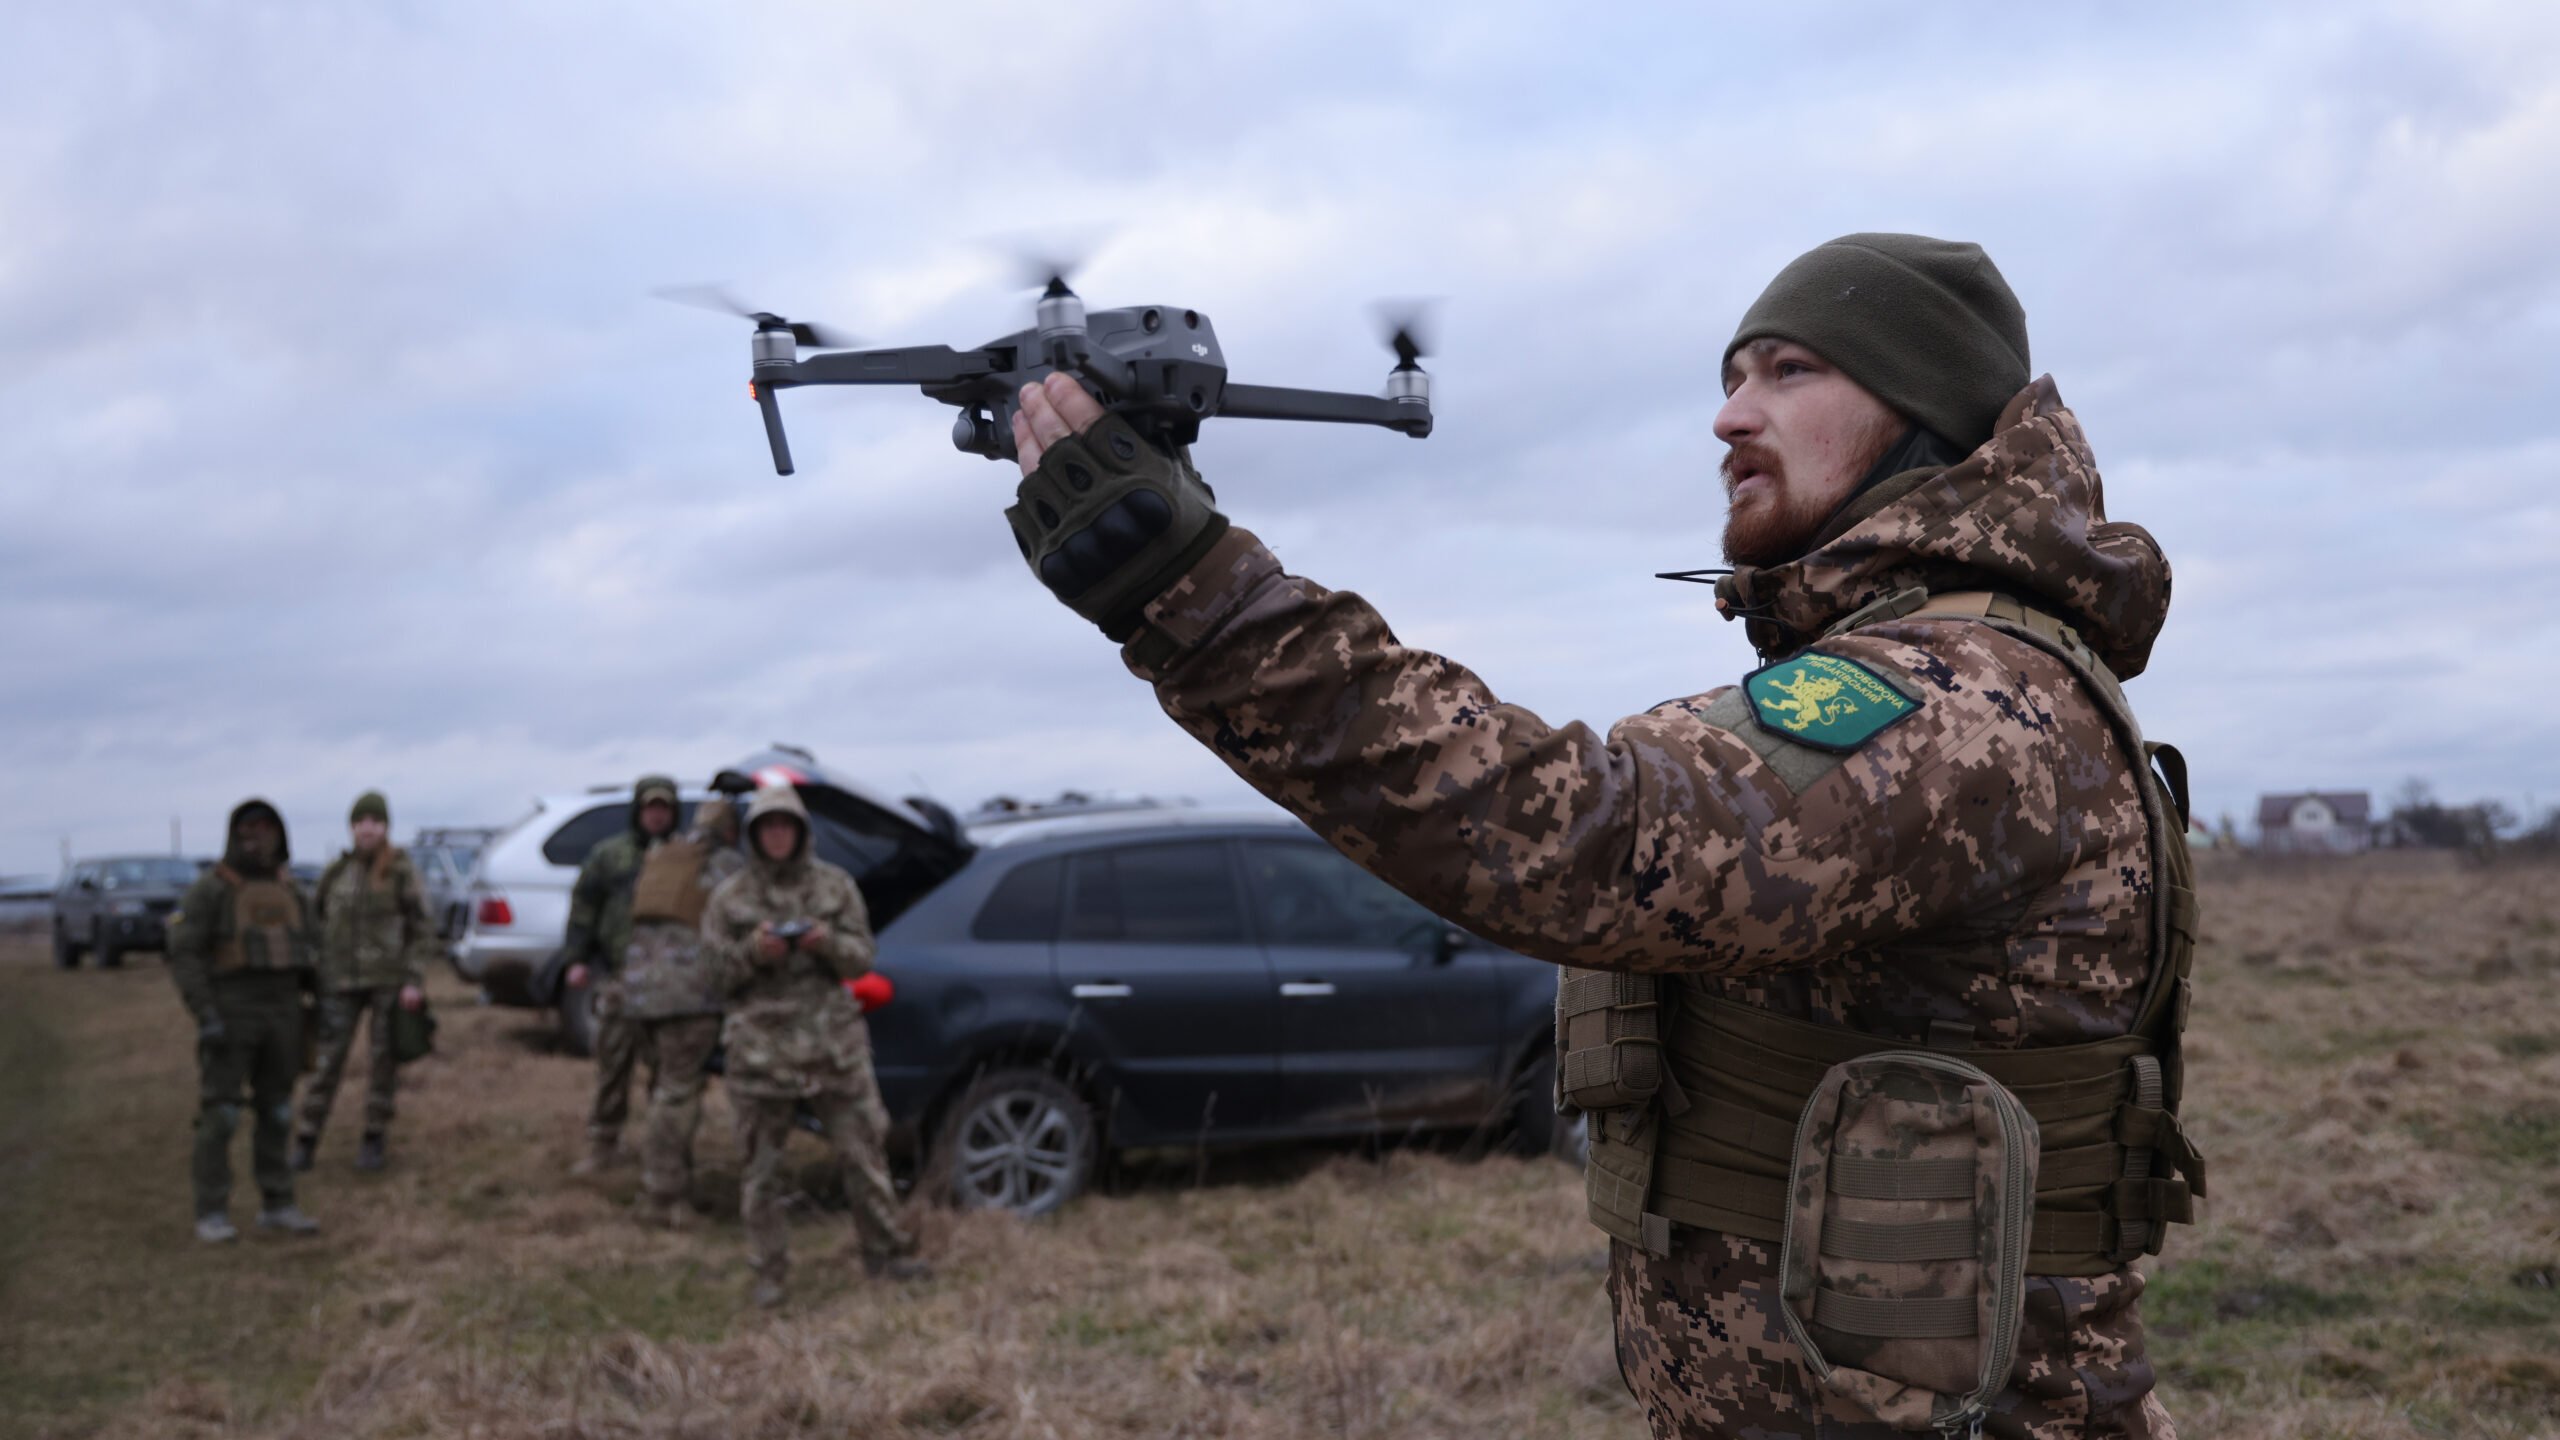 High-tech trench warfare: 5 hard-won lessons-learned for the US from Ukraine